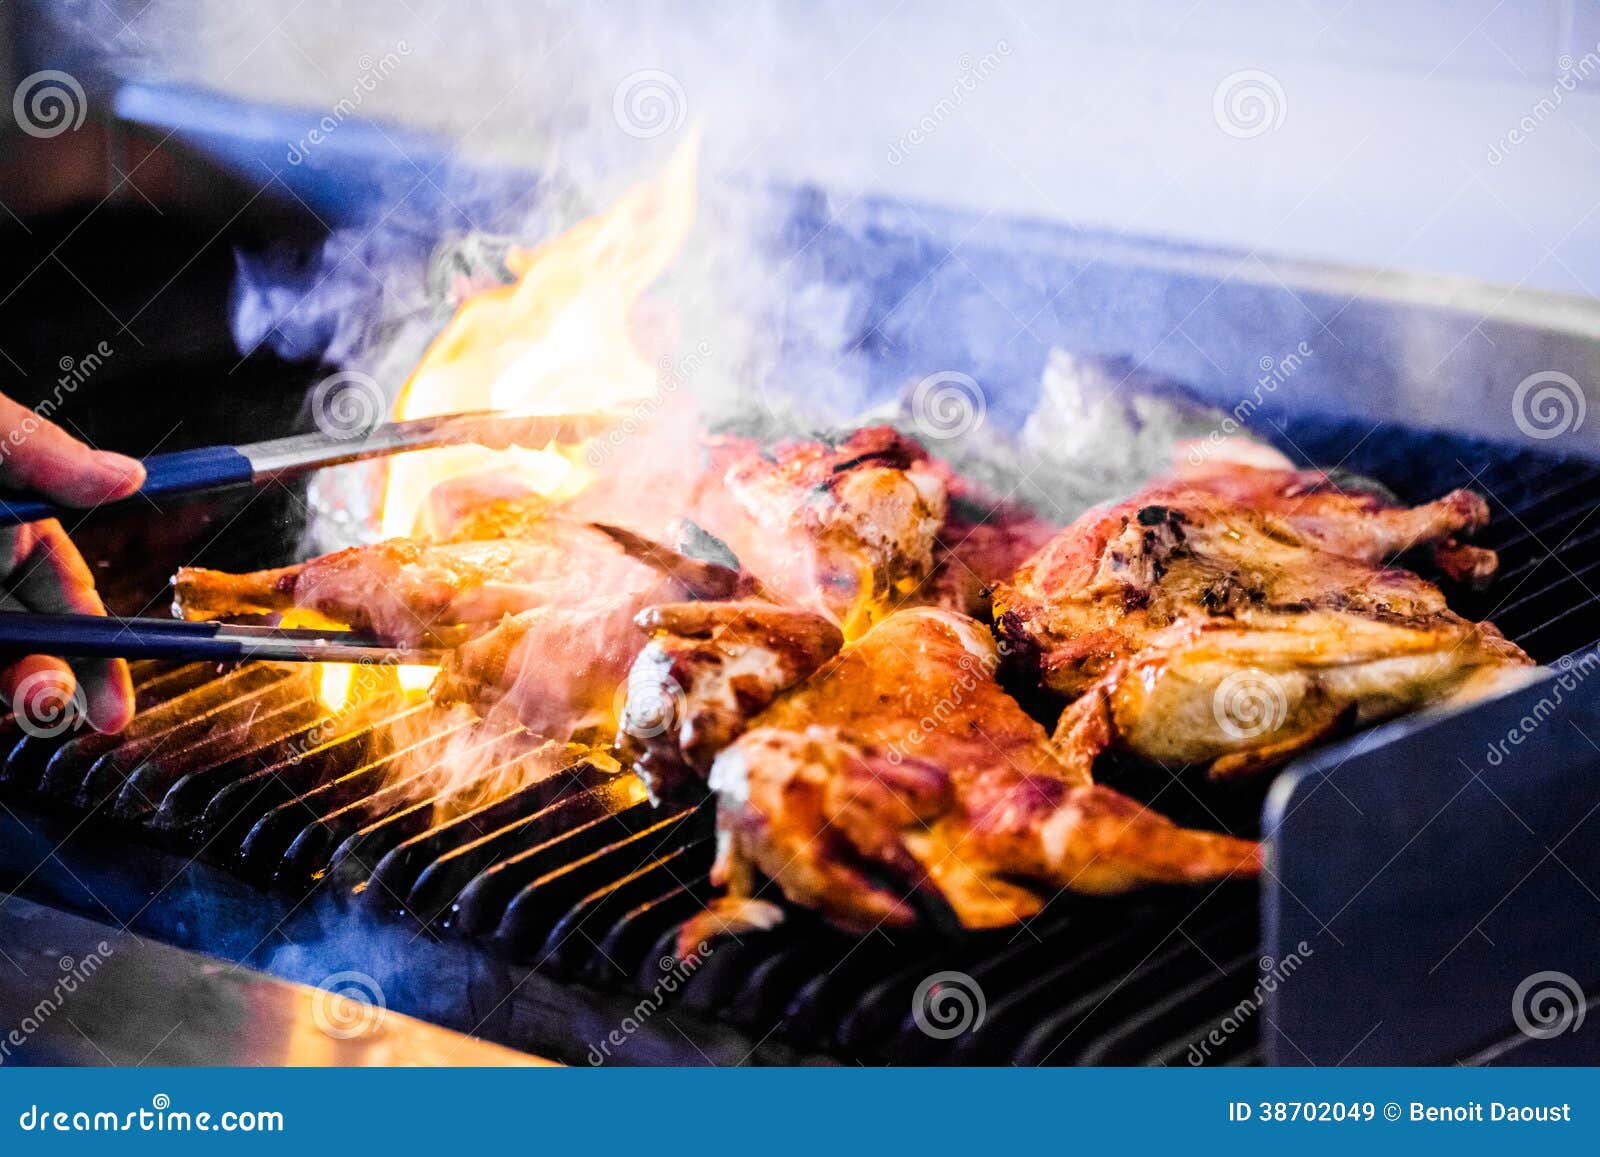 portuguese chicken on the grill